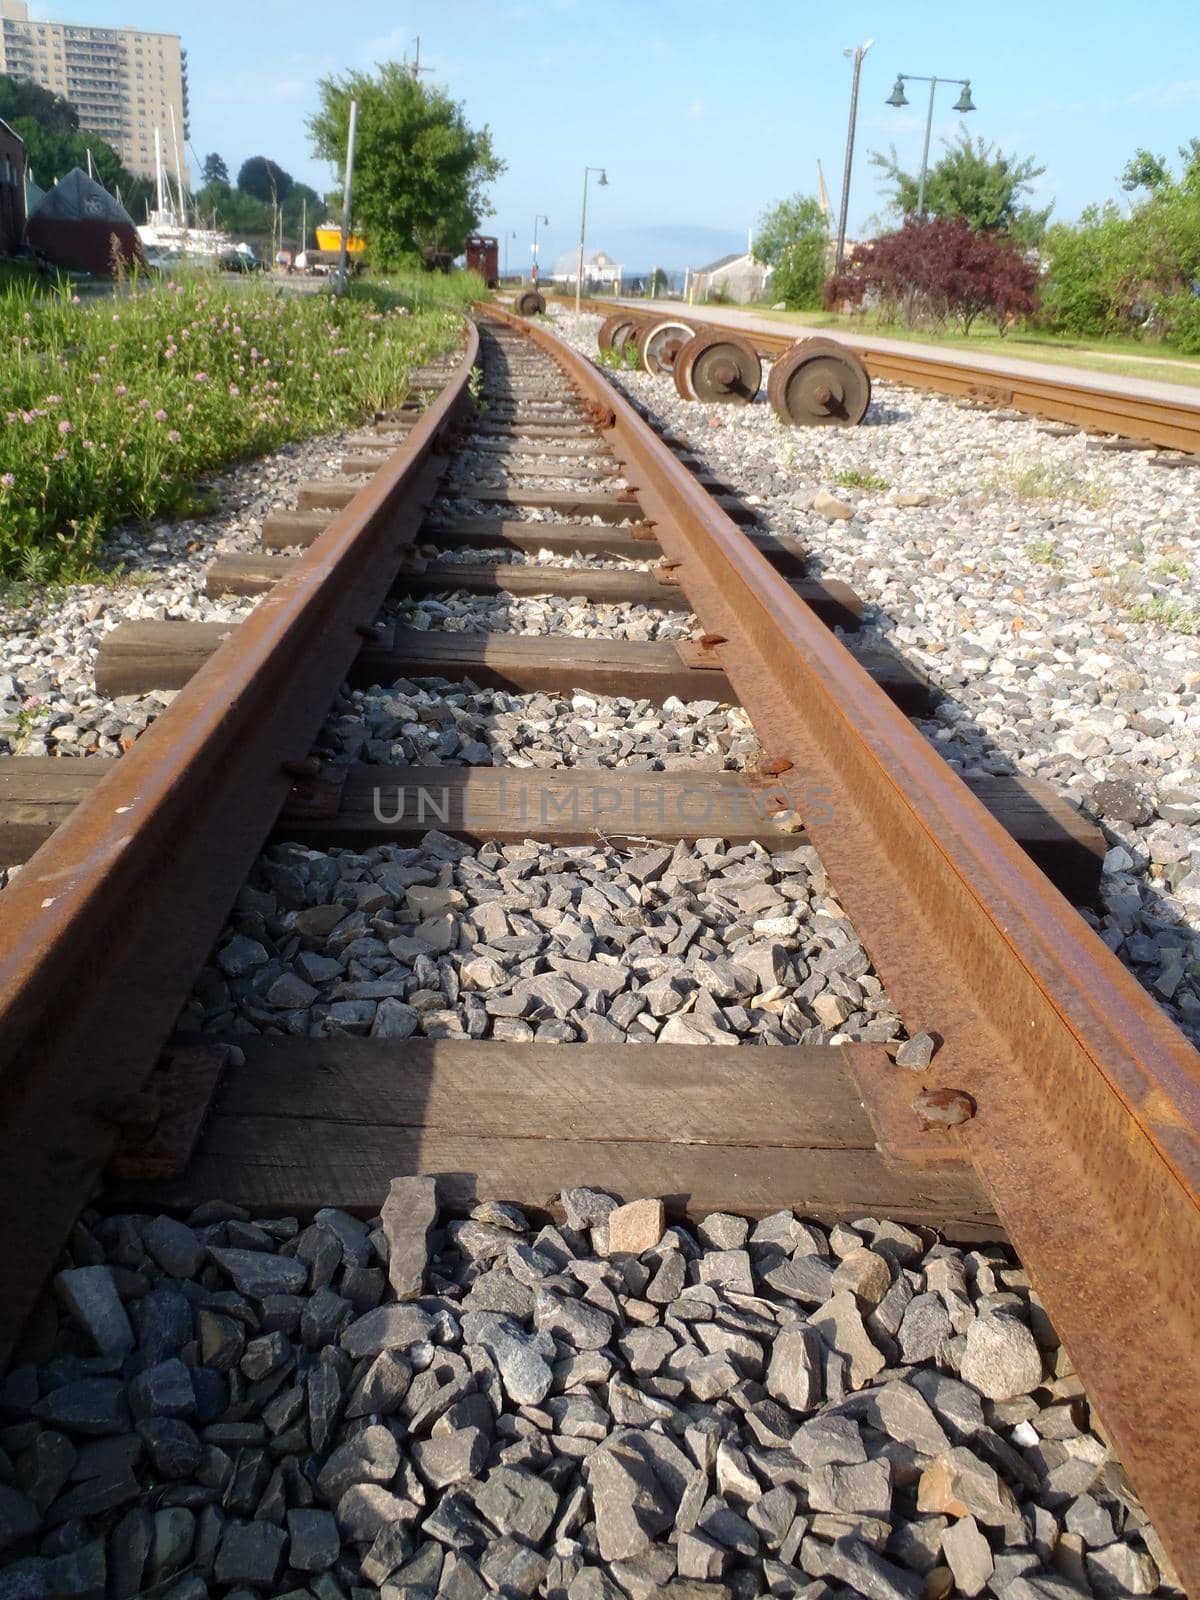 Railroad tracks running into distance with through Portland, Maine with grass growing and rocks in between tracks.